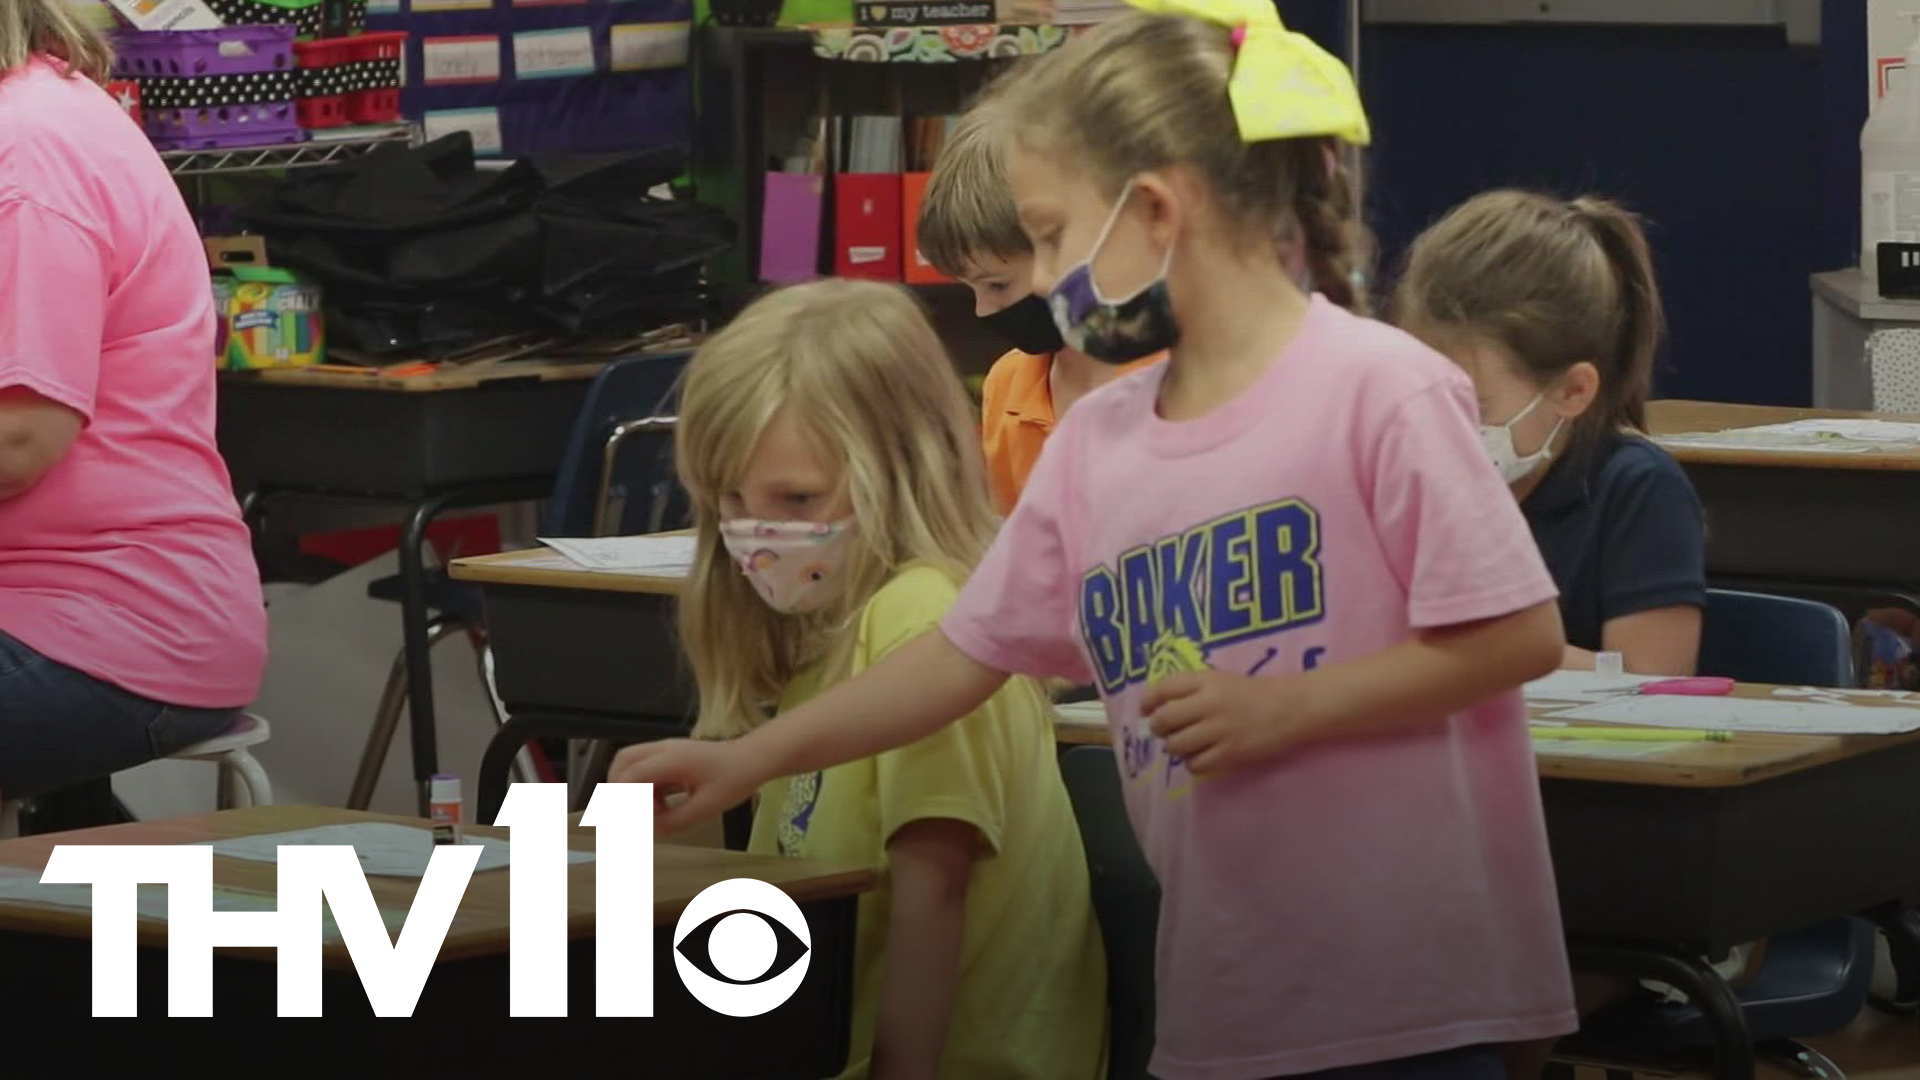 As students across Arkansas begin to prepare for school, districts are looking at implementing mask requirements to help stop the spread of COVID-19.